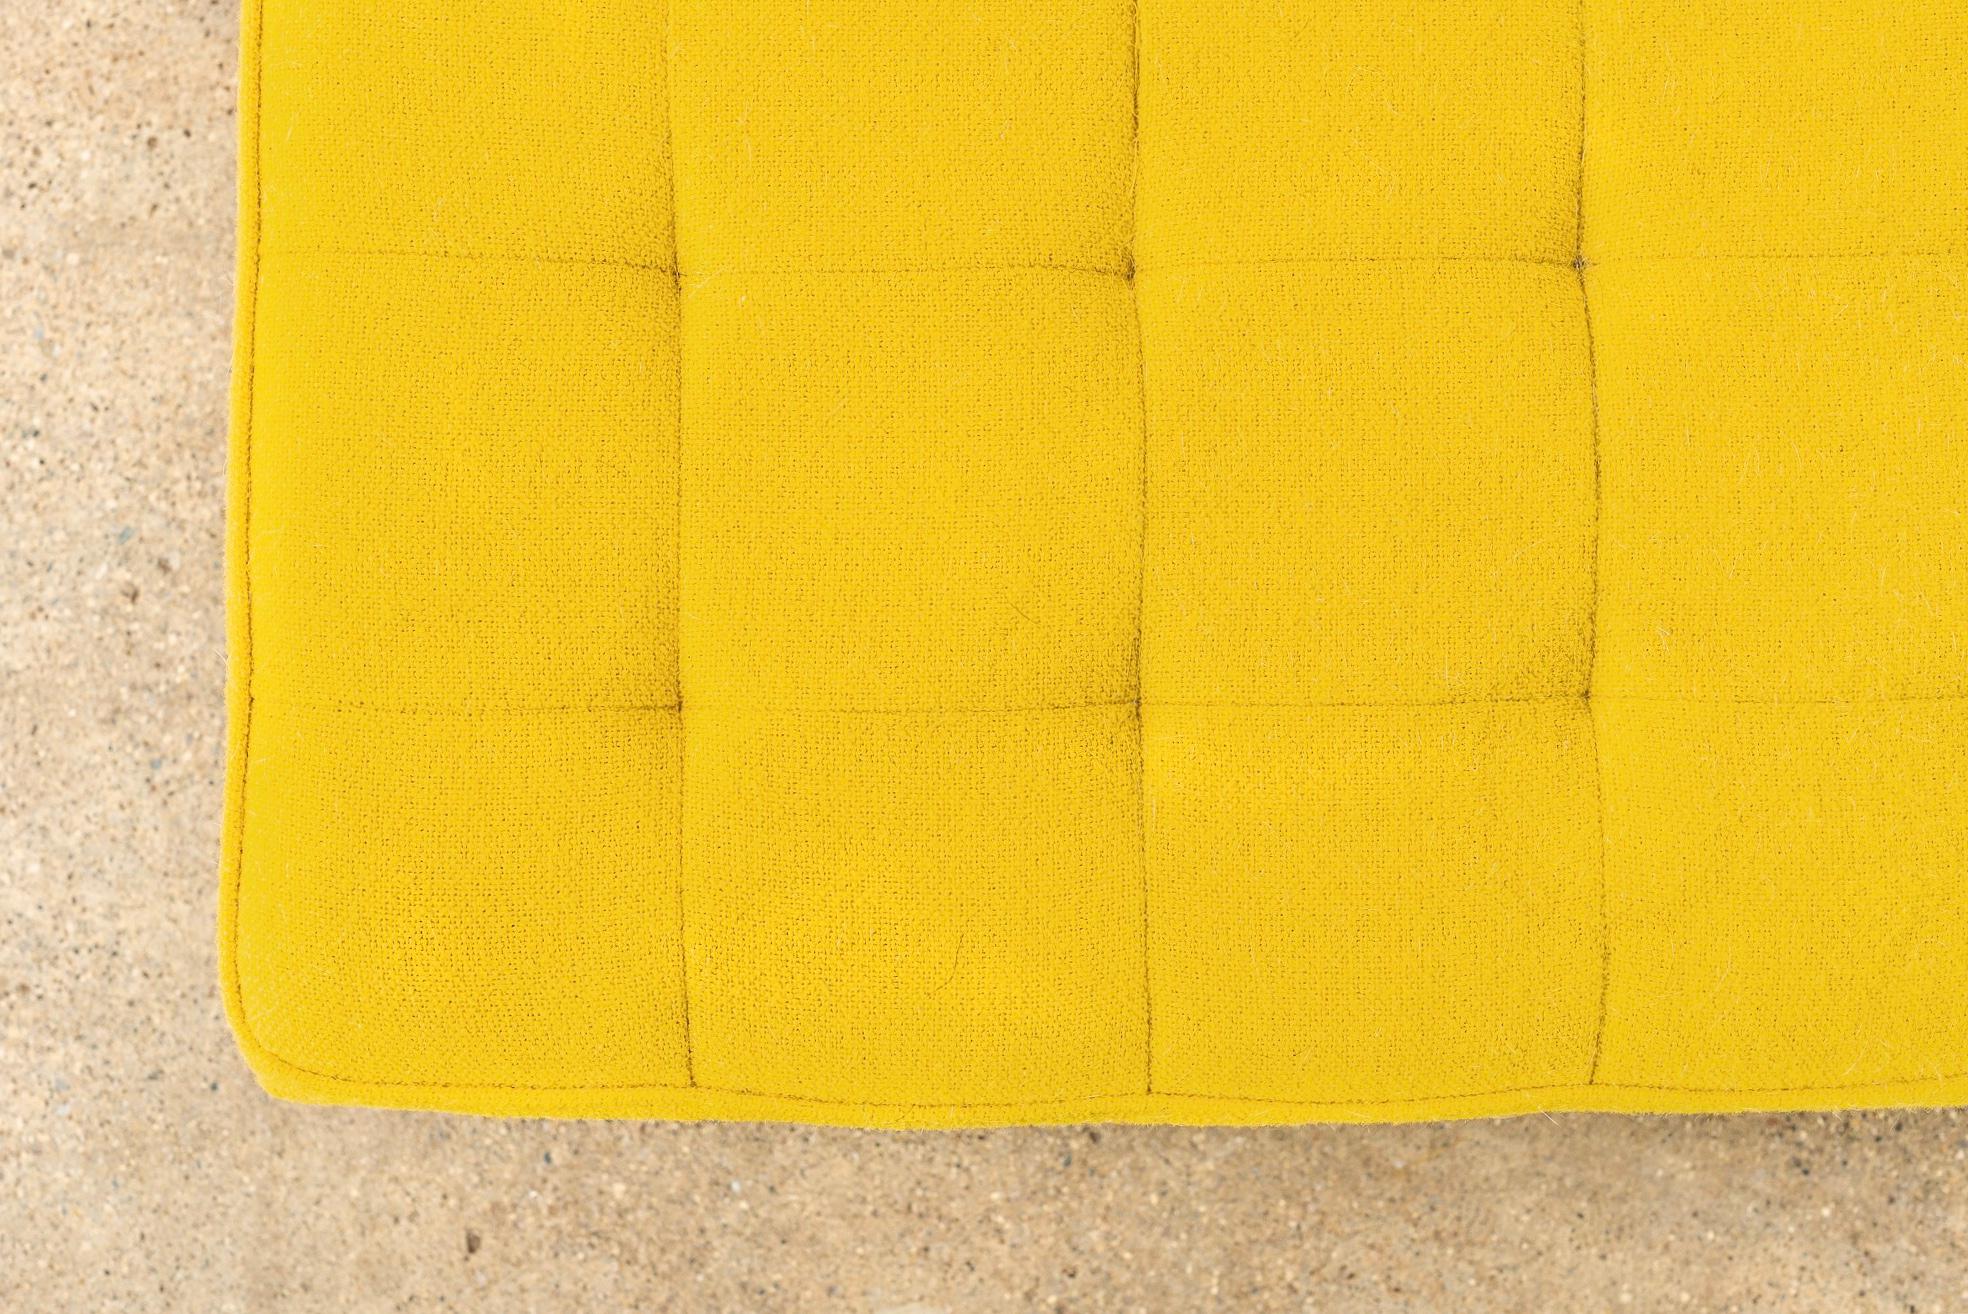 Midcentury Daybed Sofa with Yellow Knoll Fabric, 1960s For Sale 3